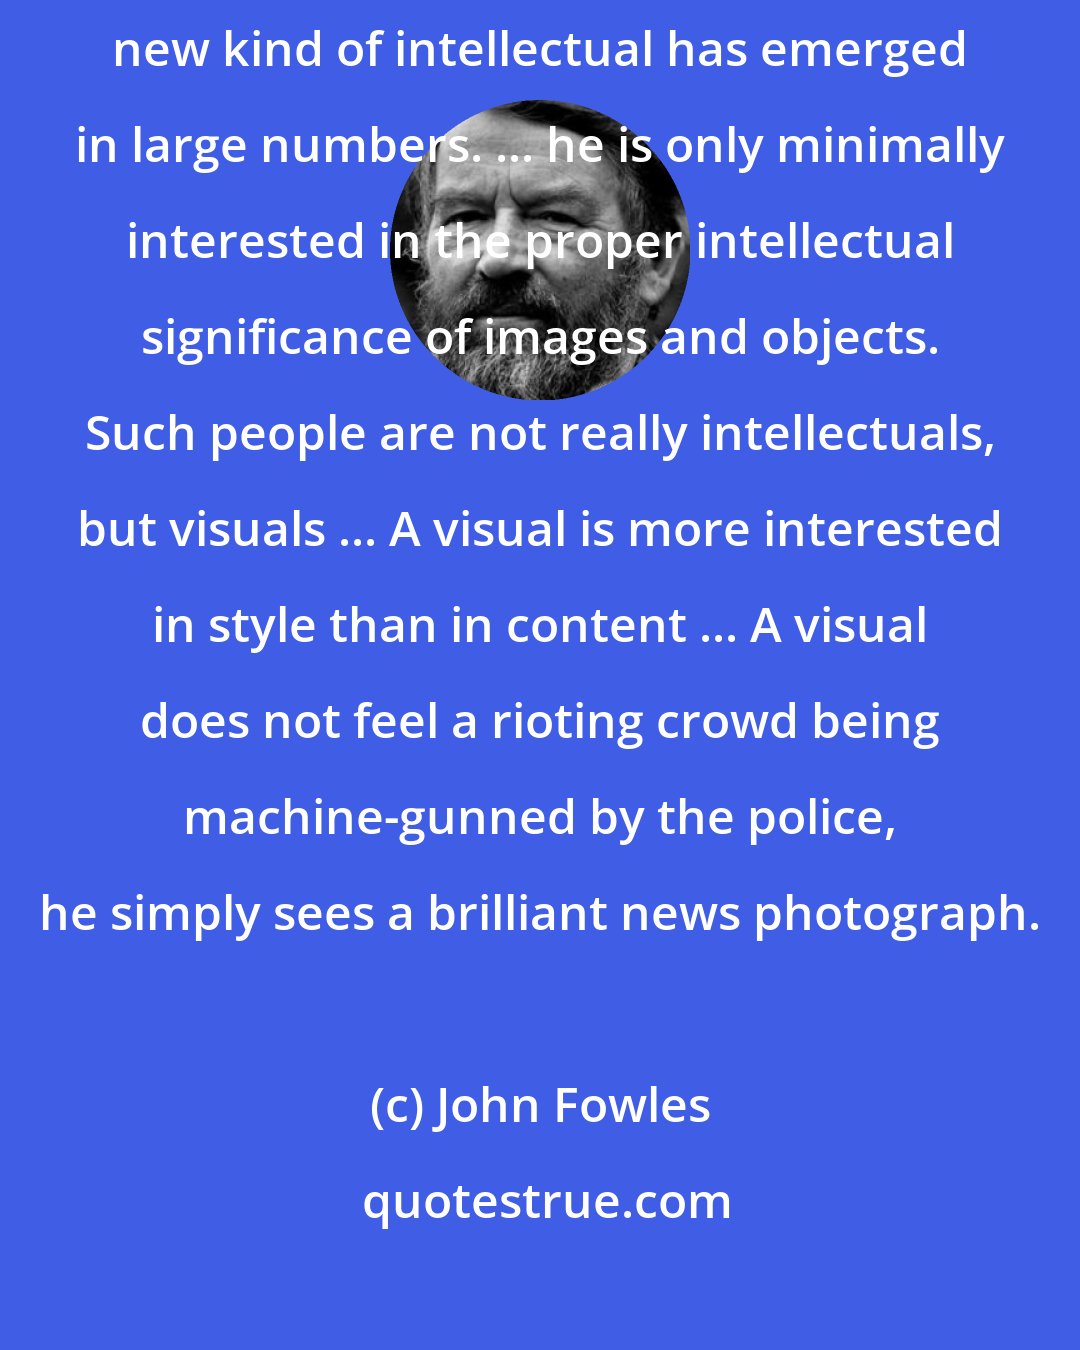 John Fowles: Even more ominous ... is the fact that since the Second World War a new kind of intellectual has emerged in large numbers. ... he is only minimally interested in the proper intellectual significance of images and objects. Such people are not really intellectuals, but visuals ... A visual is more interested in style than in content ... A visual does not feel a rioting crowd being machine-gunned by the police, he simply sees a brilliant news photograph.